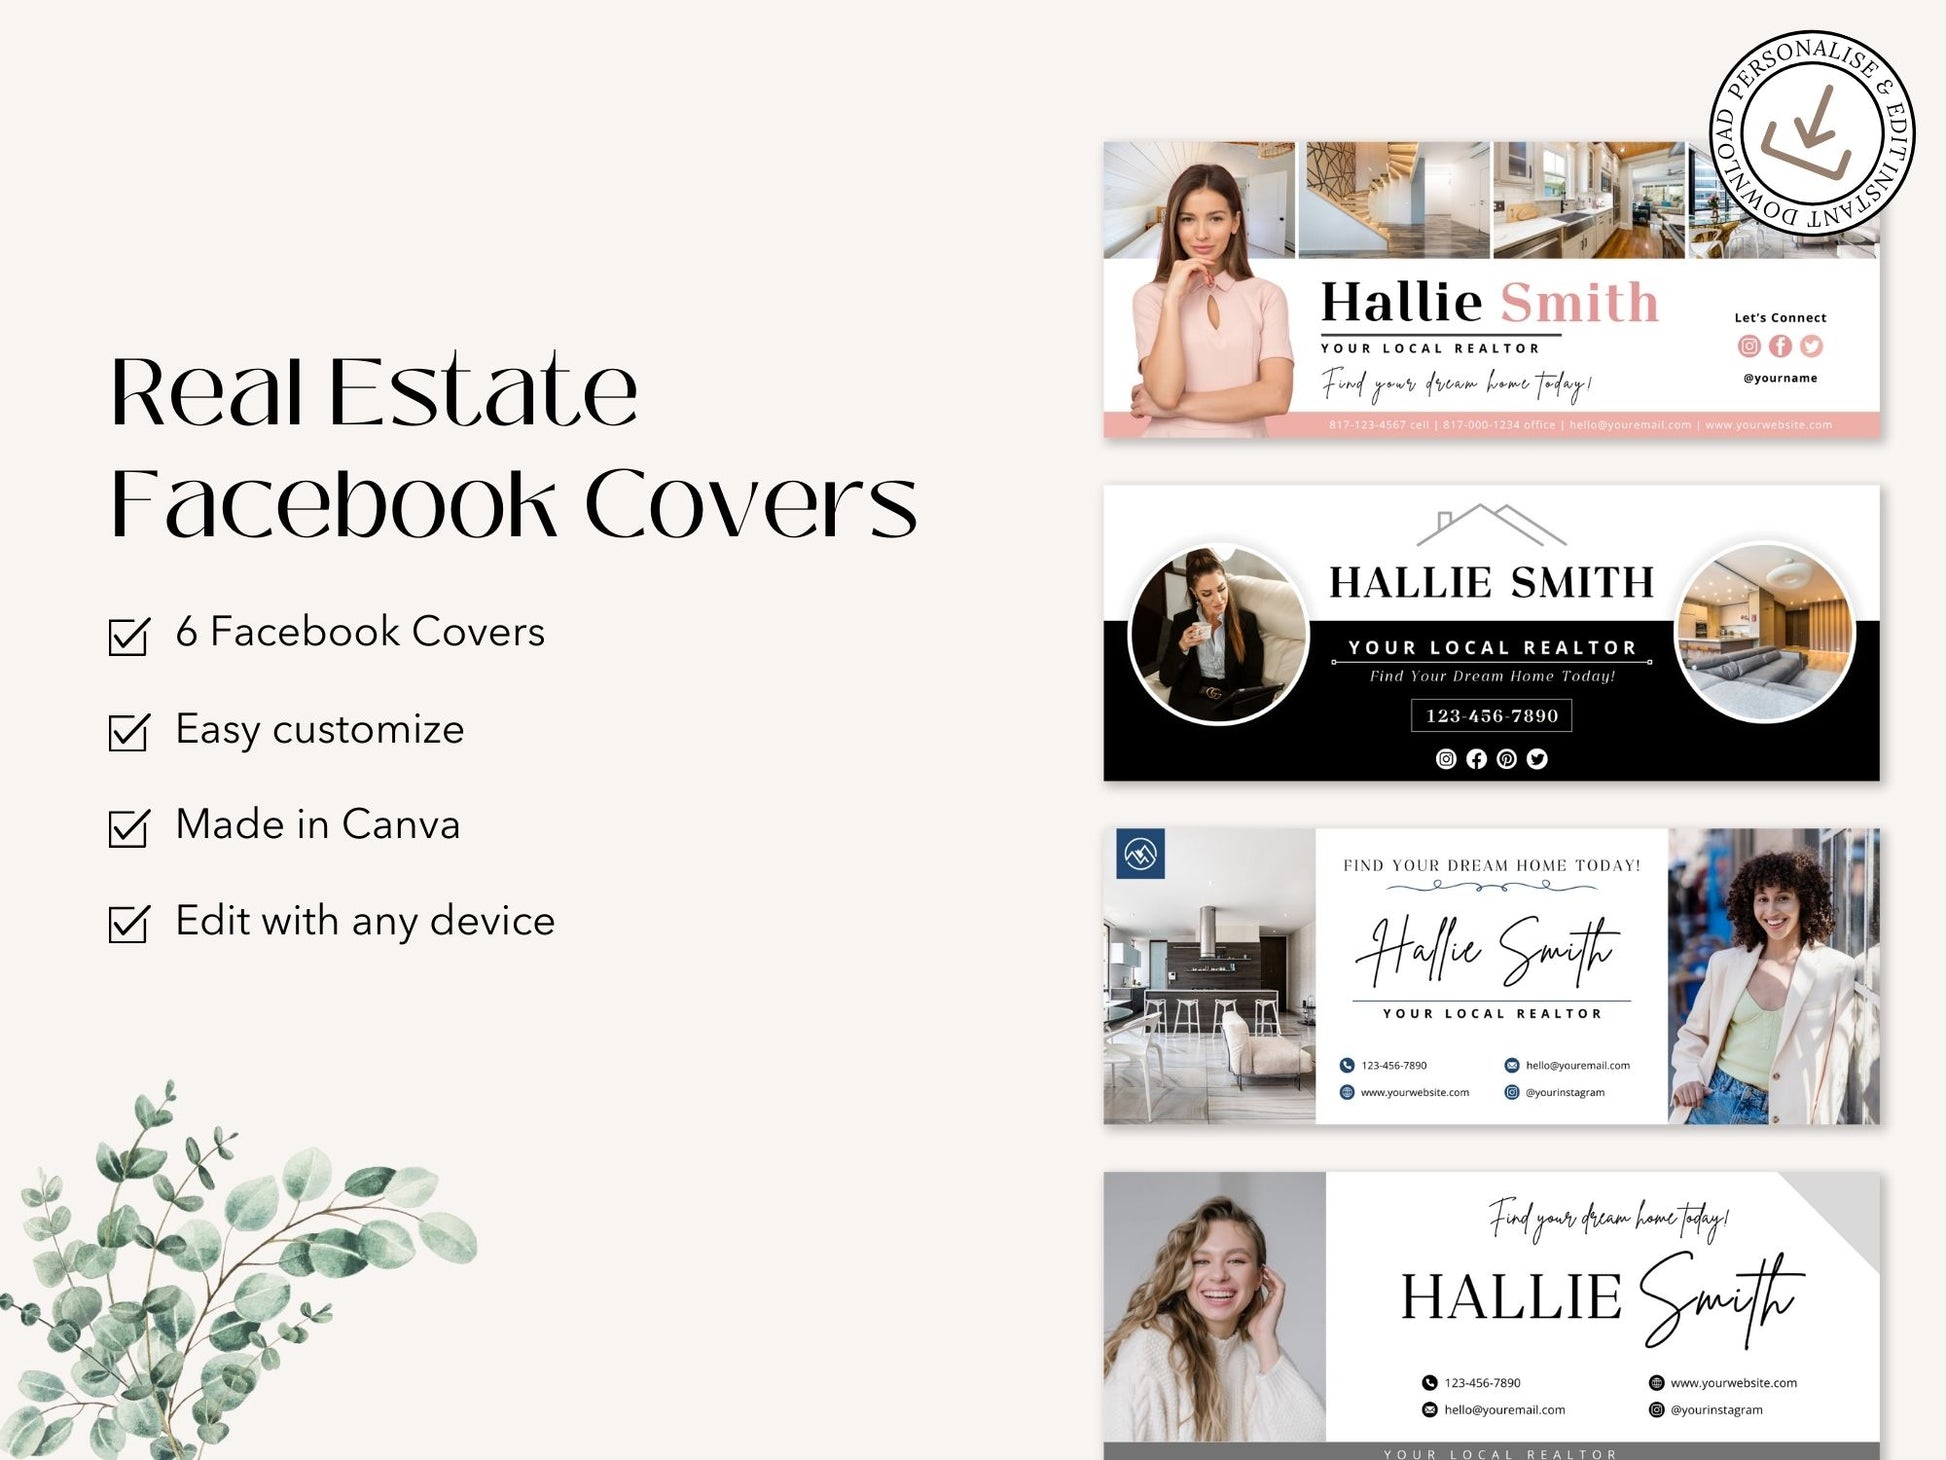 Real Estate Facebook Covers Vol 01 - Professionally designed covers for real estate professionals' Facebook pages.